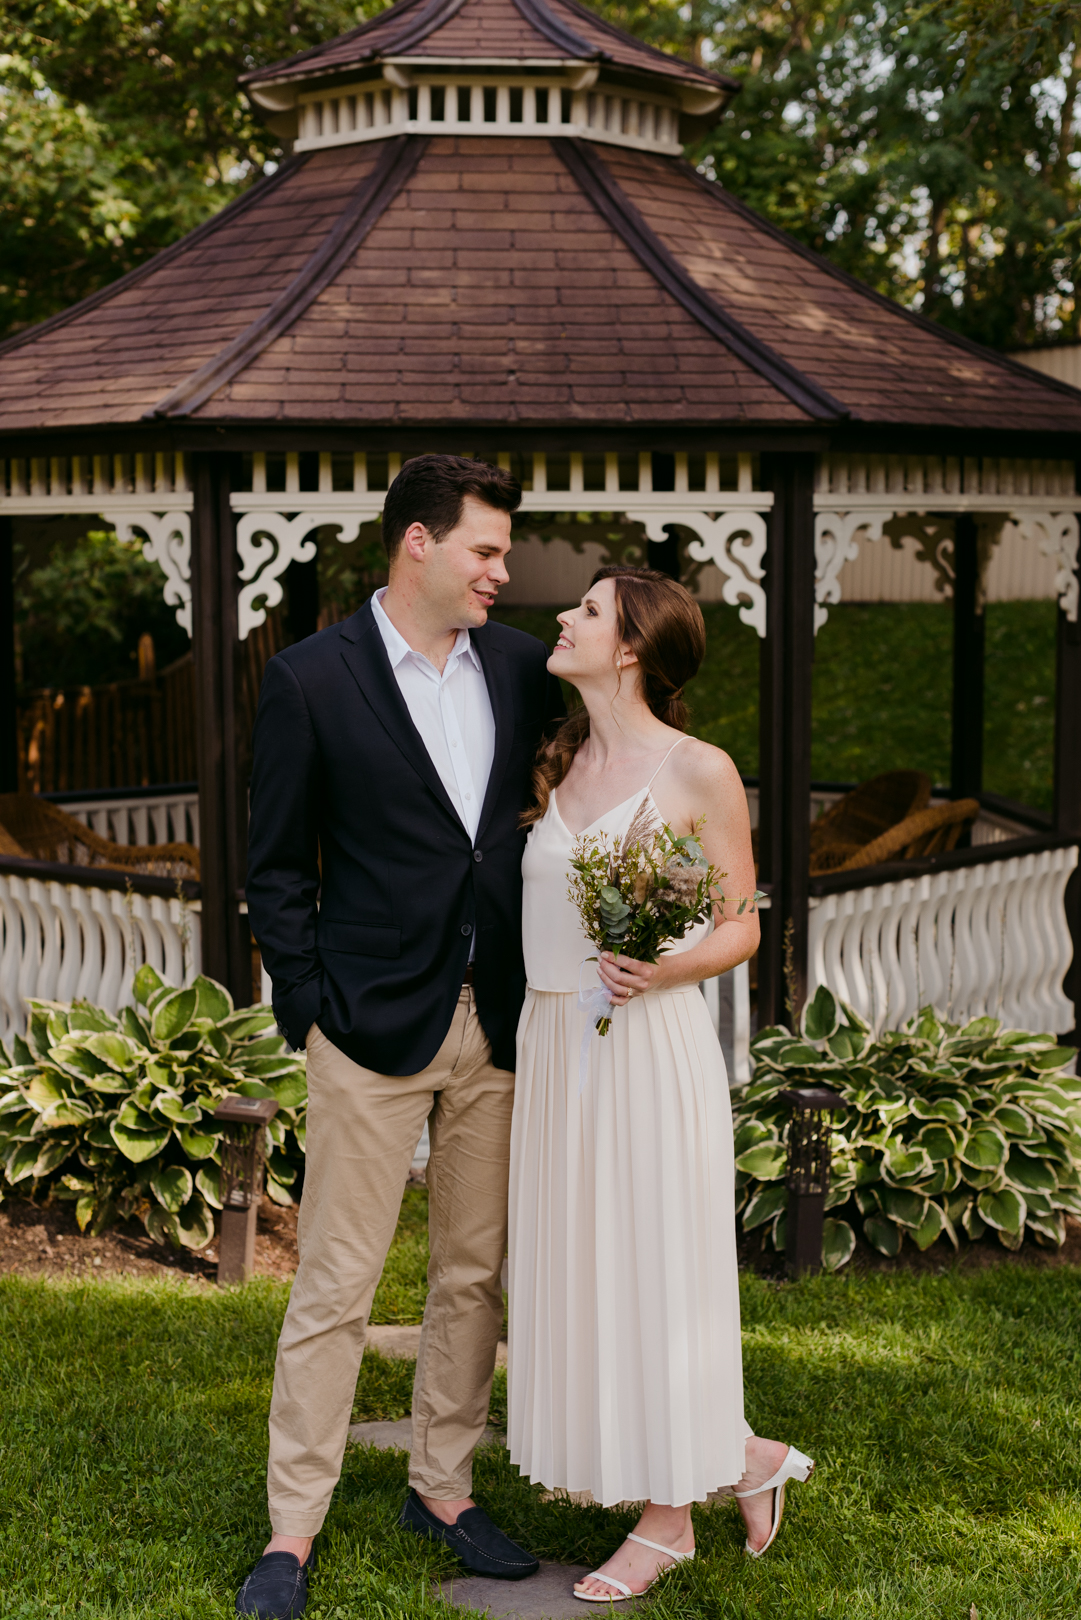 bride and groom in front of pergola at backyard wedding